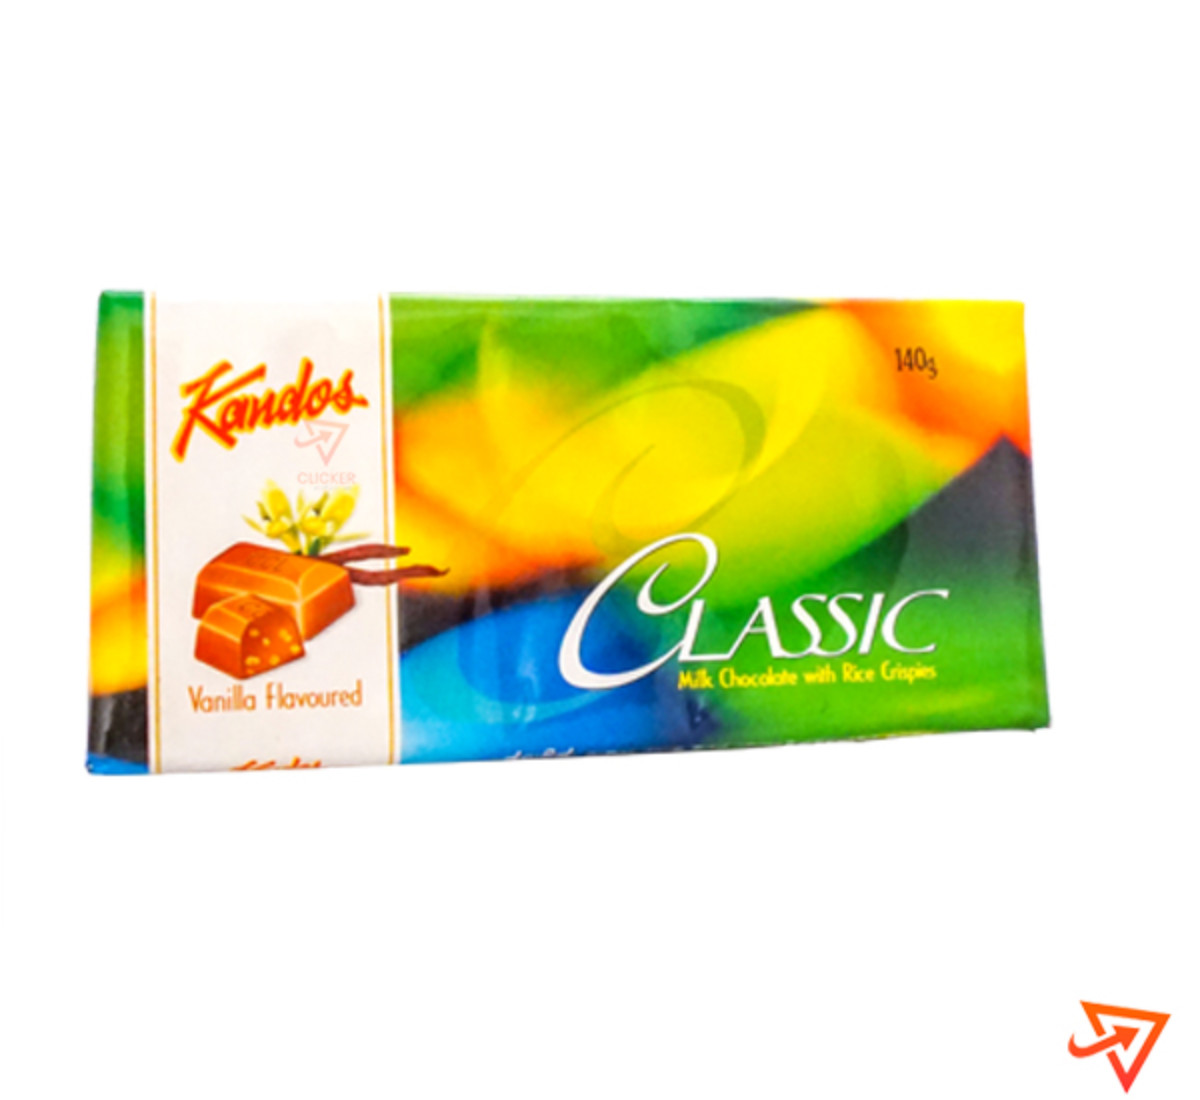 Clicker product 140g Kandos Classicmilk chocolate with rice Crispies Vanilla Flavour 1155